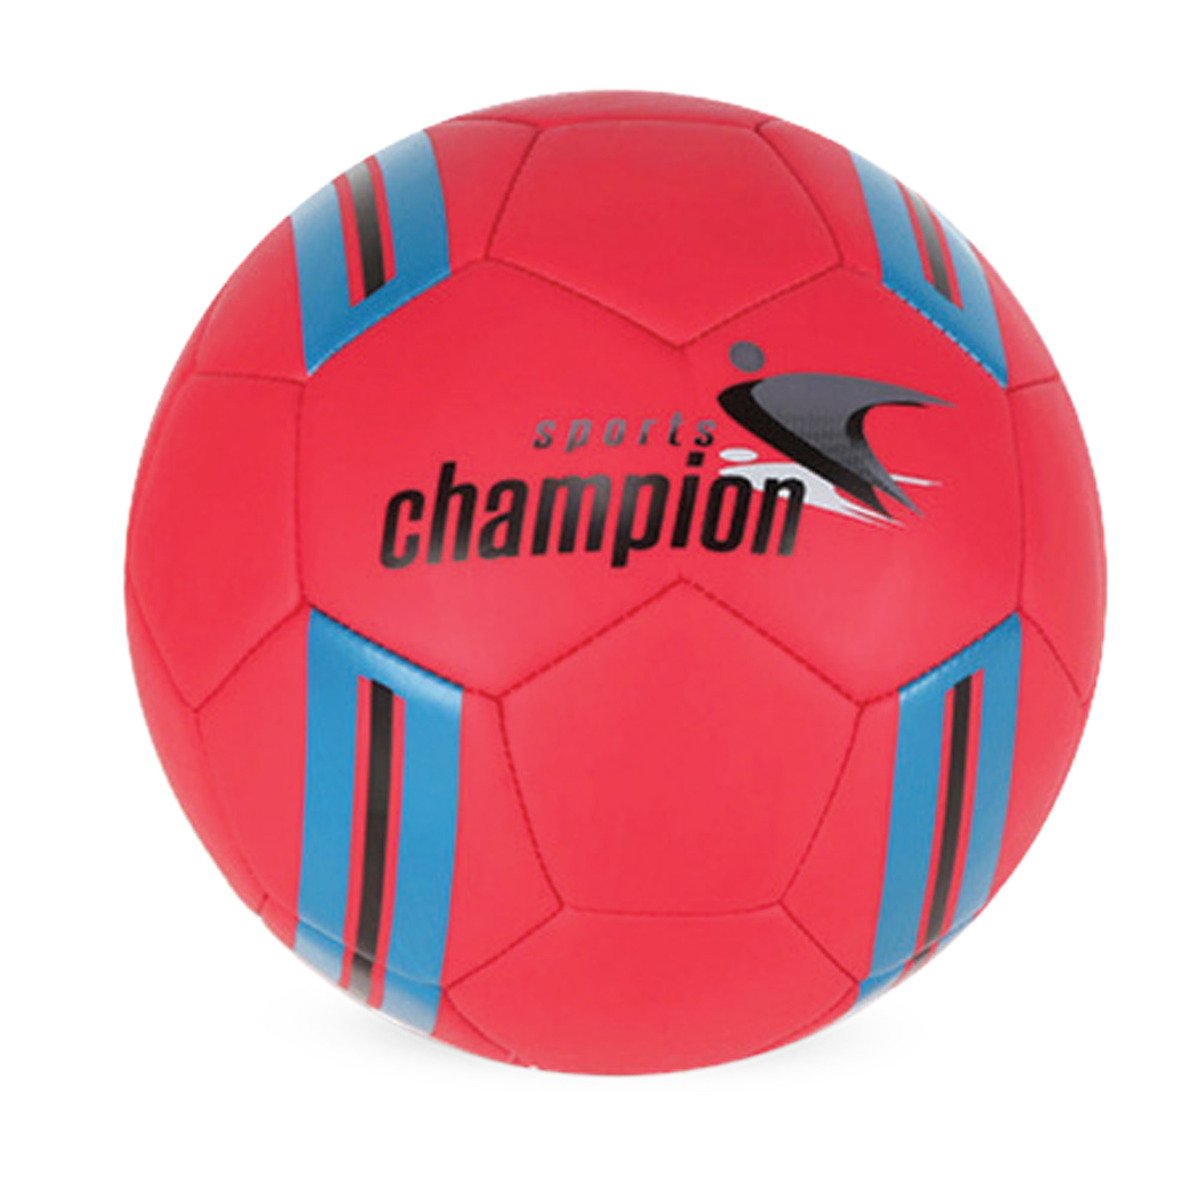 Sports Champion Football HT19117 Assorted Color & Design